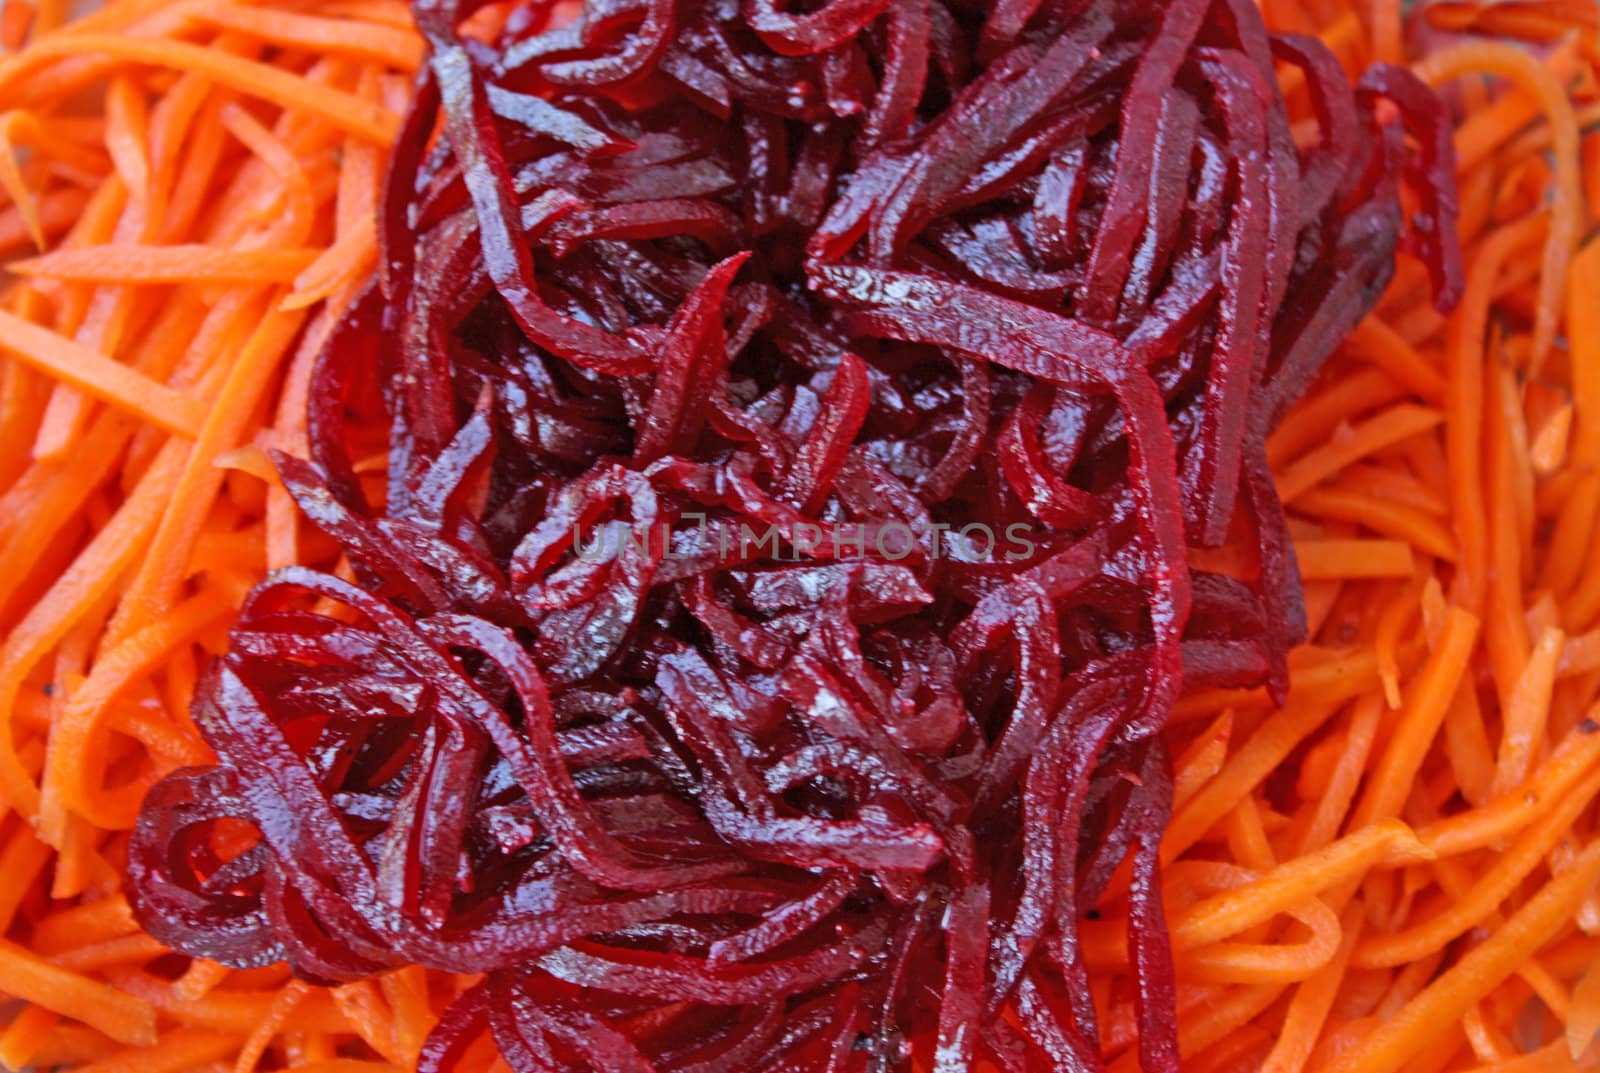 Close up of the sliced beetroot and carrot.